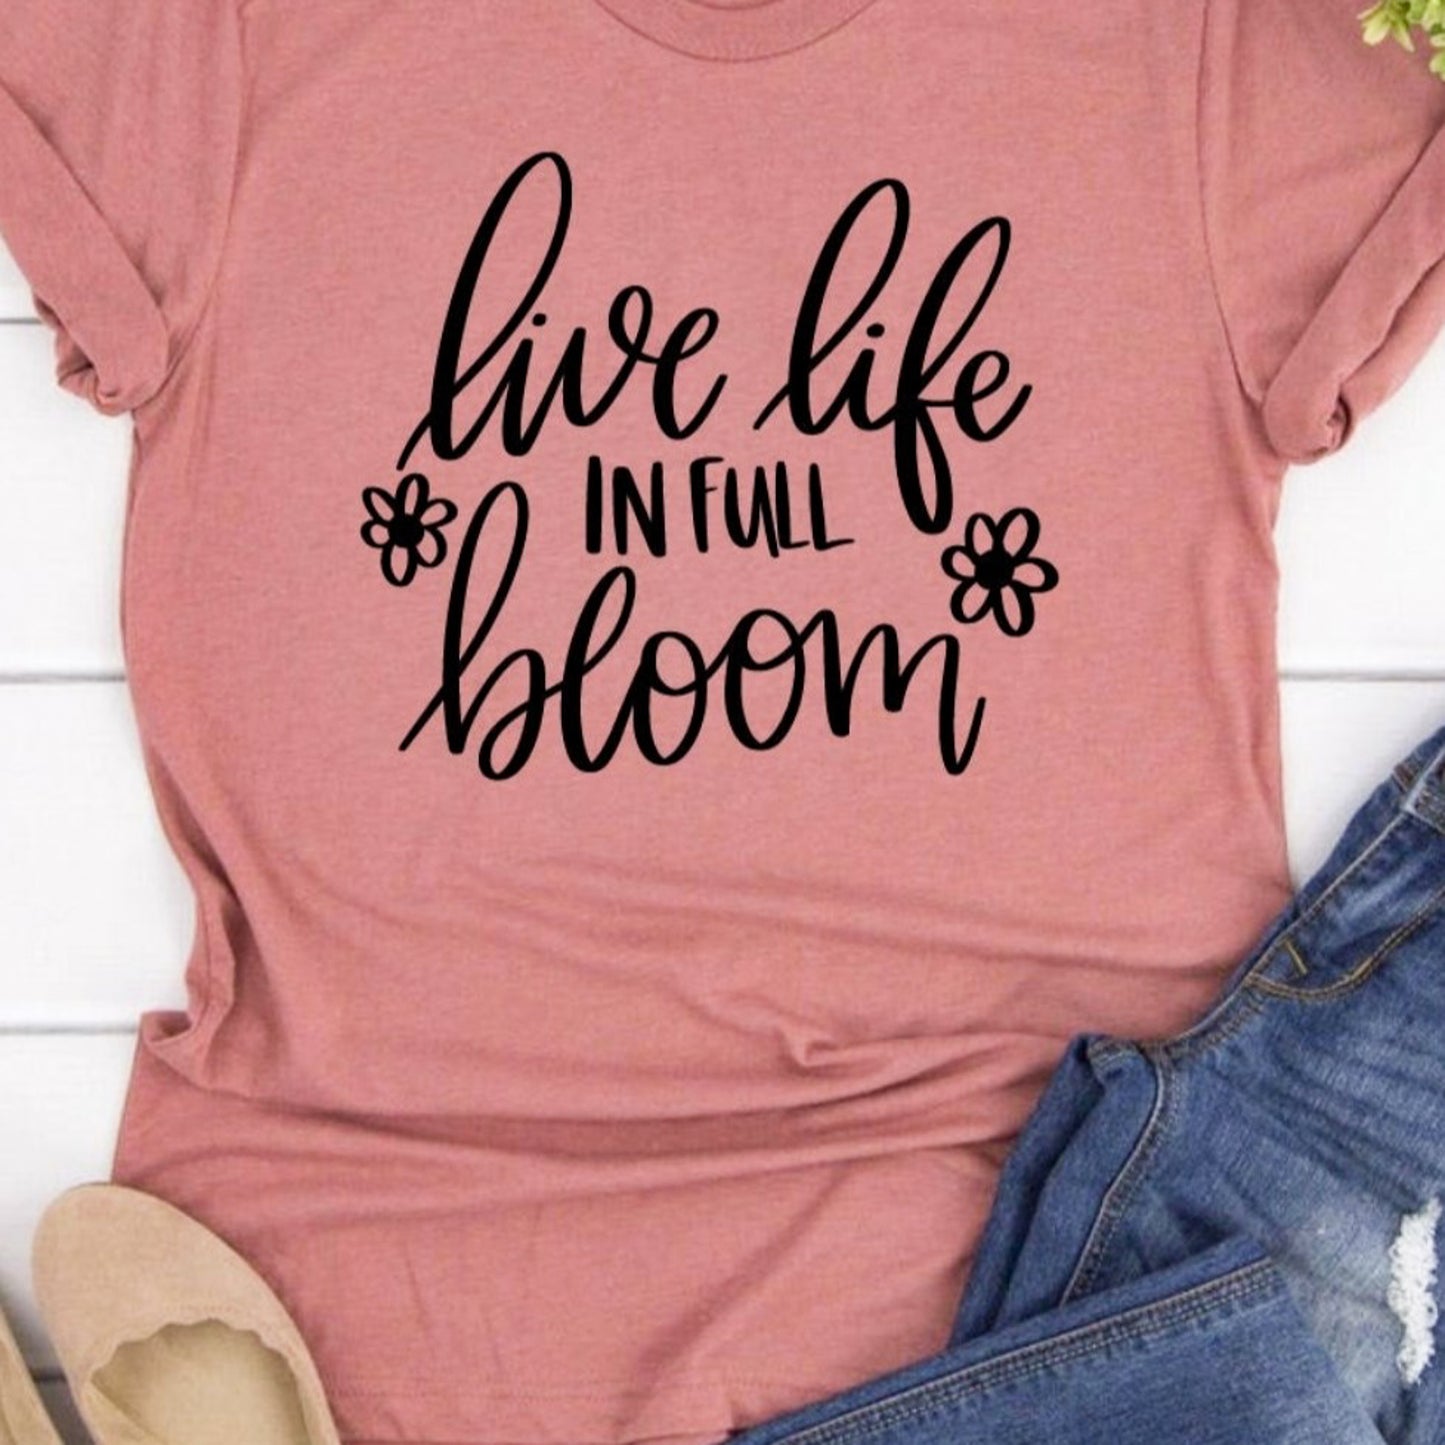 Live Life In Full Bloom Tee